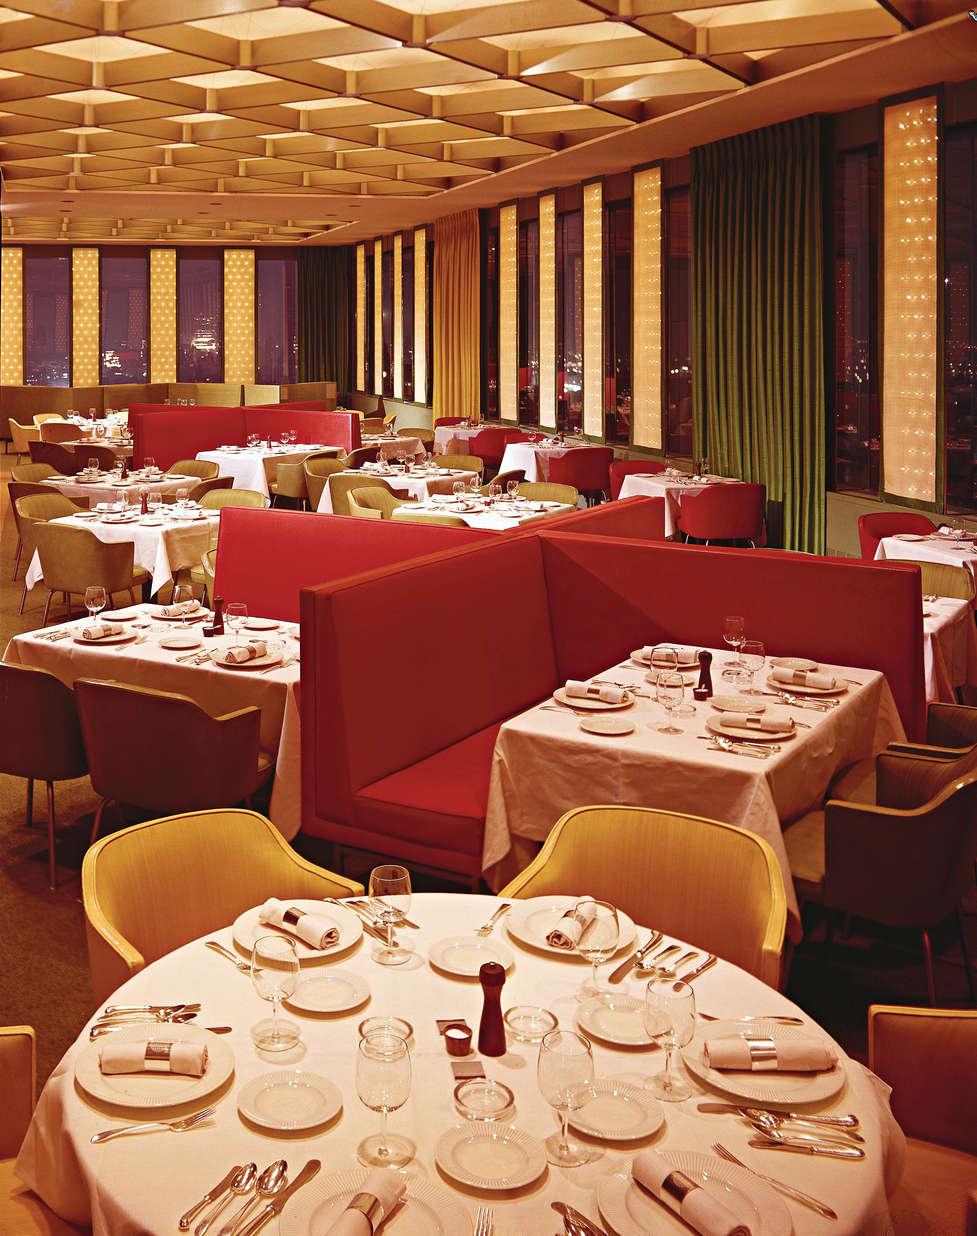 Hemisphere Club and Tower Suite Restaurant, Time-Life Building